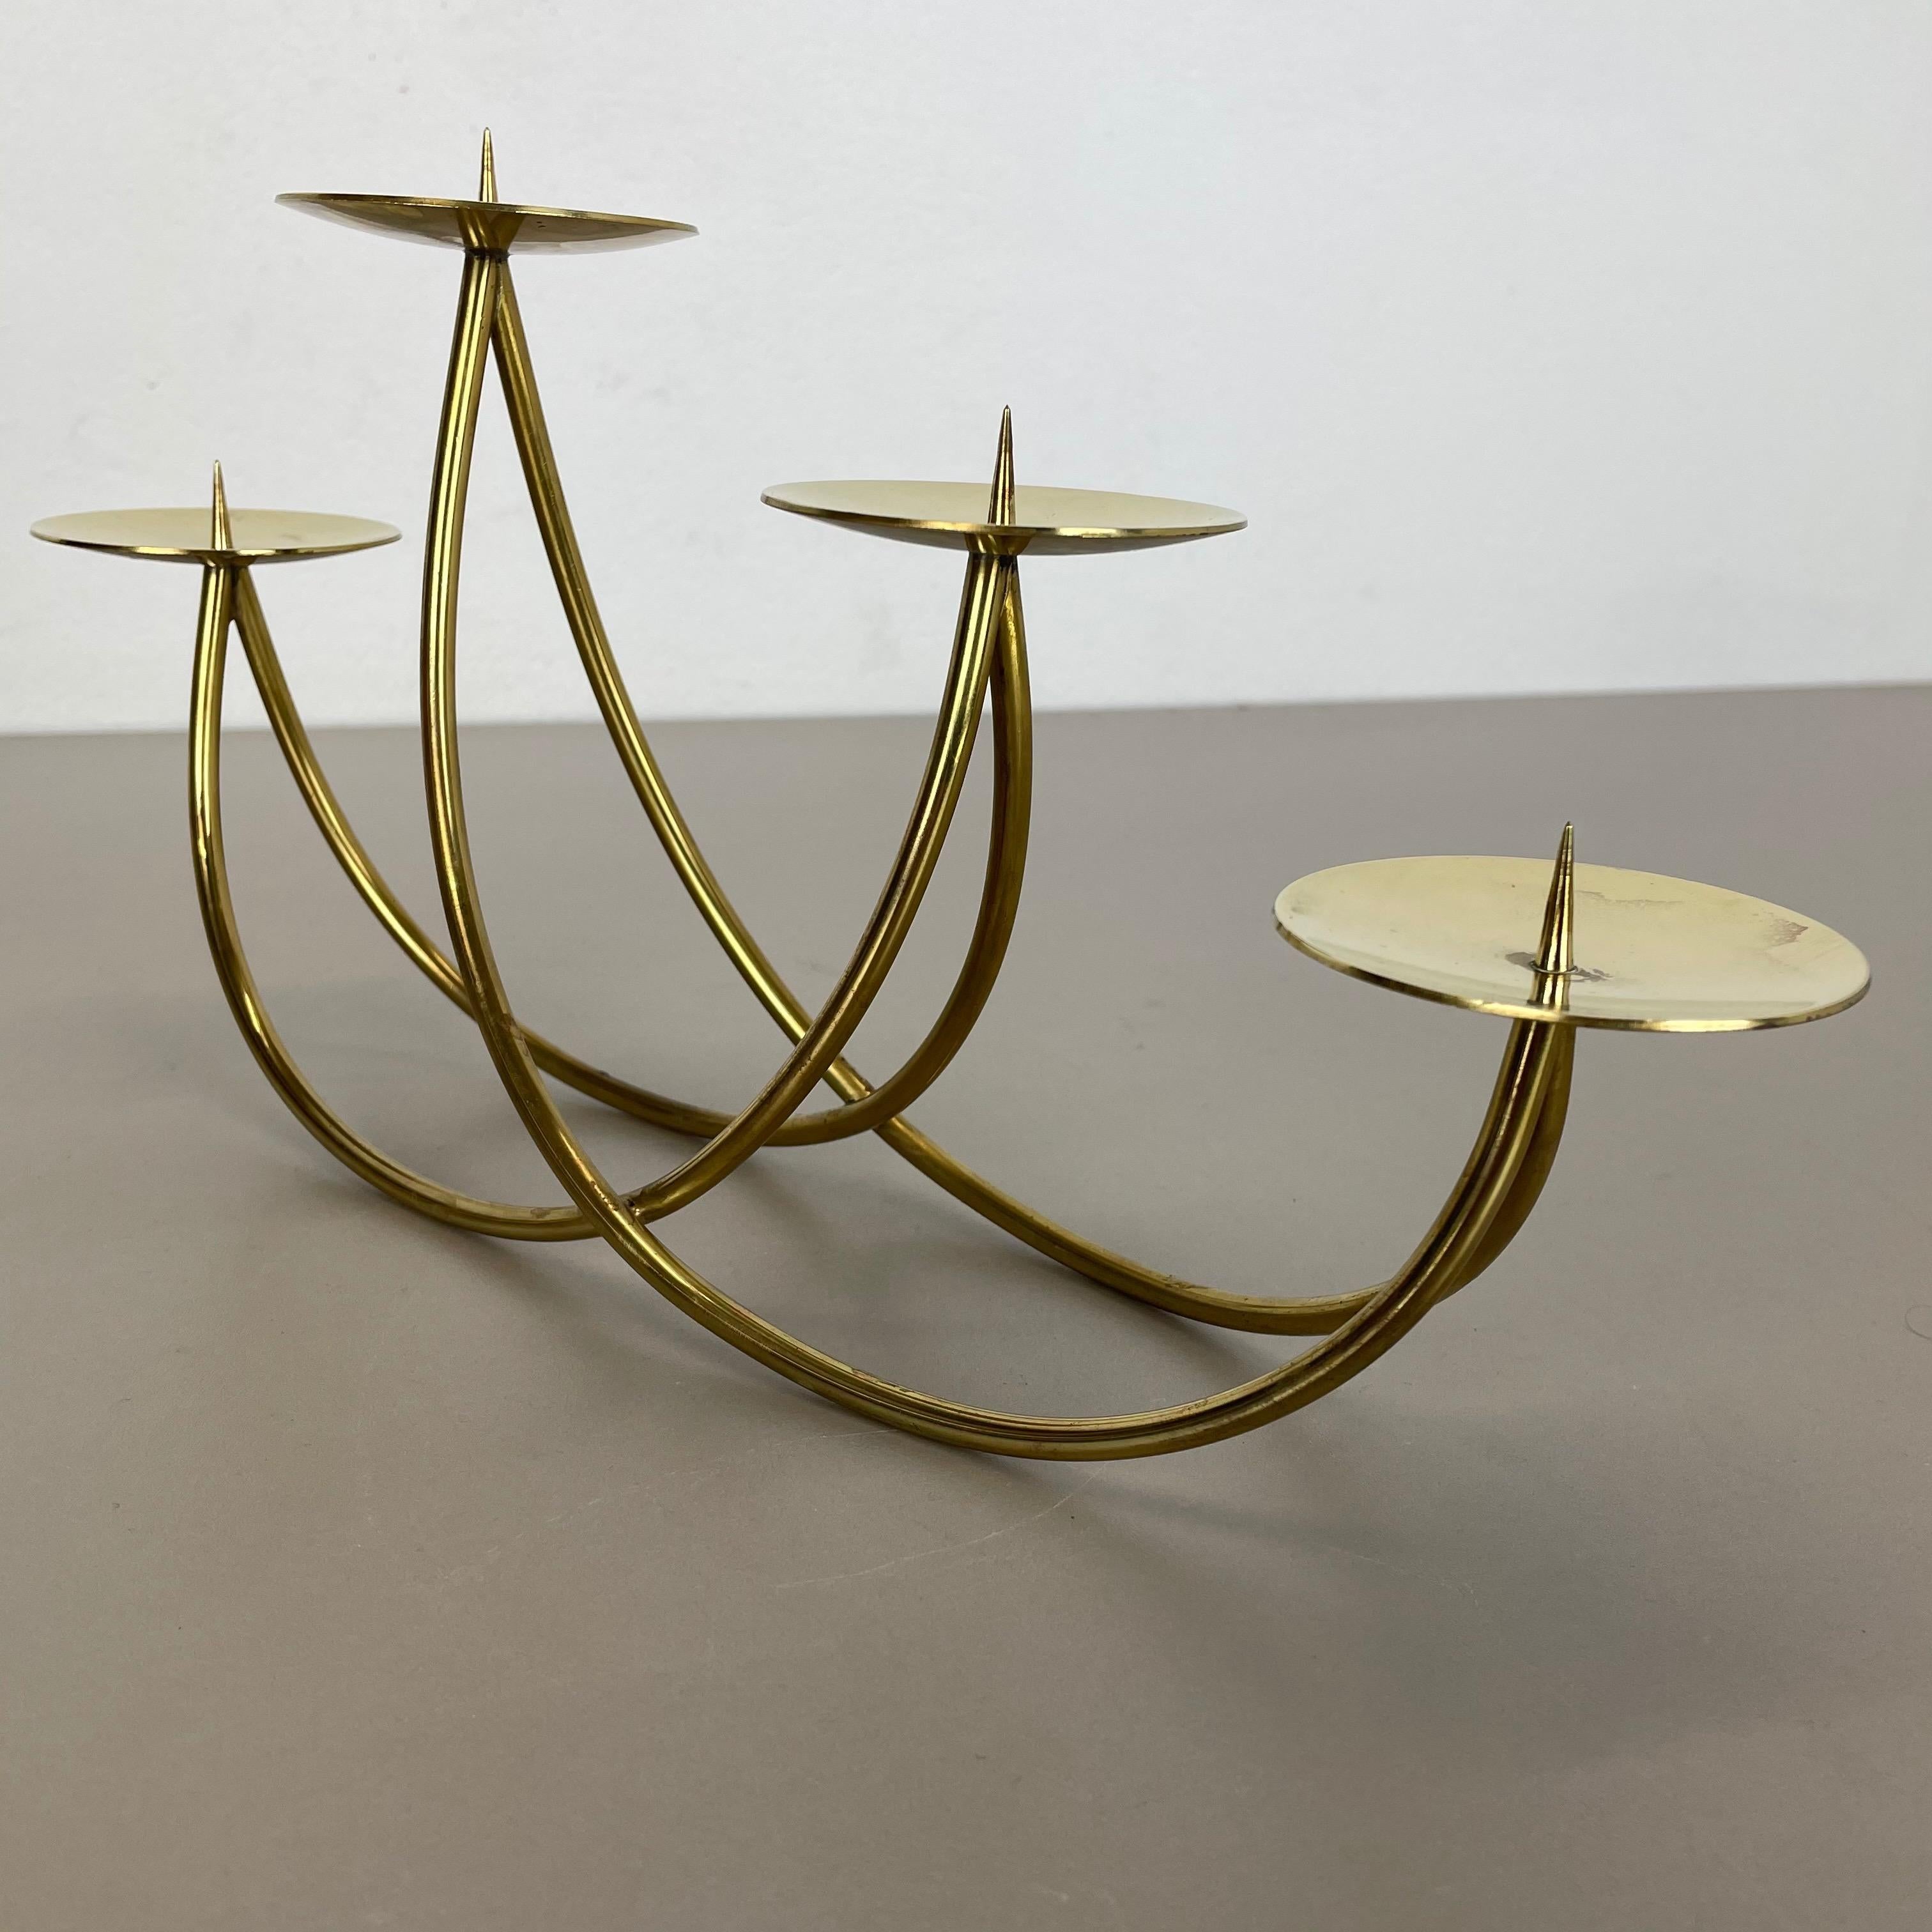 Sculptural Solid Brass Candleholder by Harald Buchrucker Bauhaus, Germany, 1950s For Sale 8